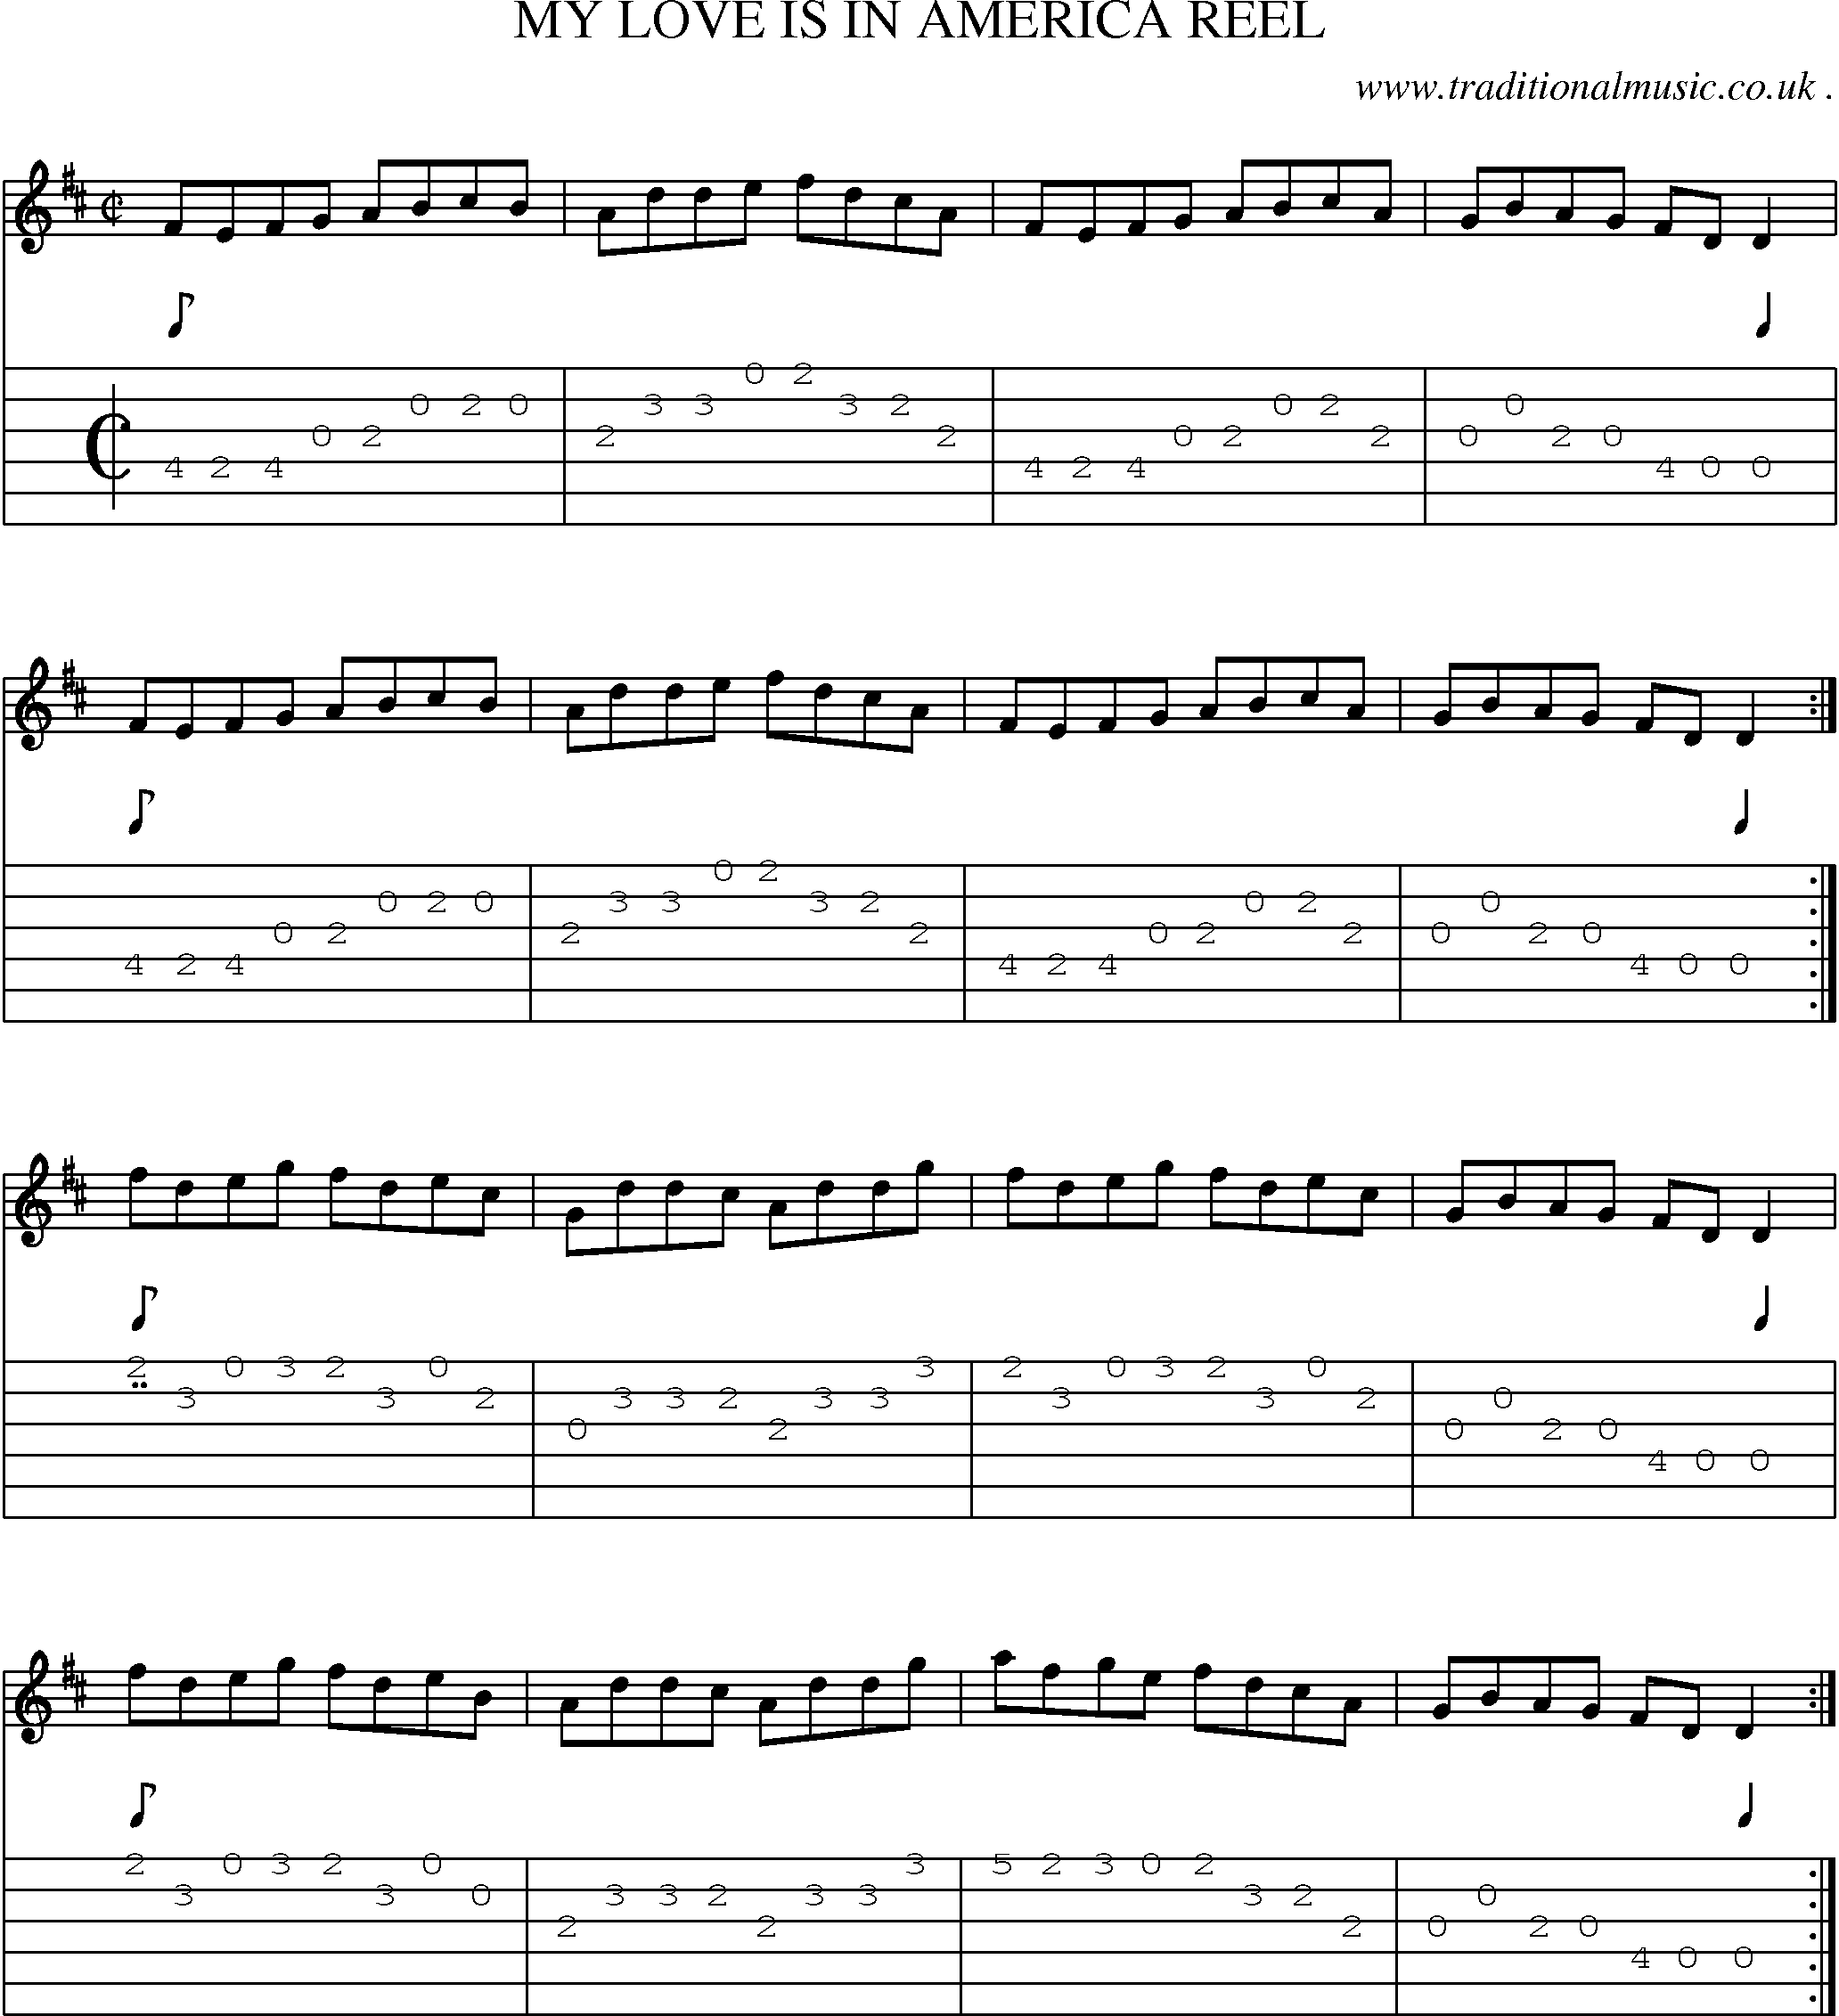 Sheet-Music and Guitar Tabs for My Love Is In America Reel